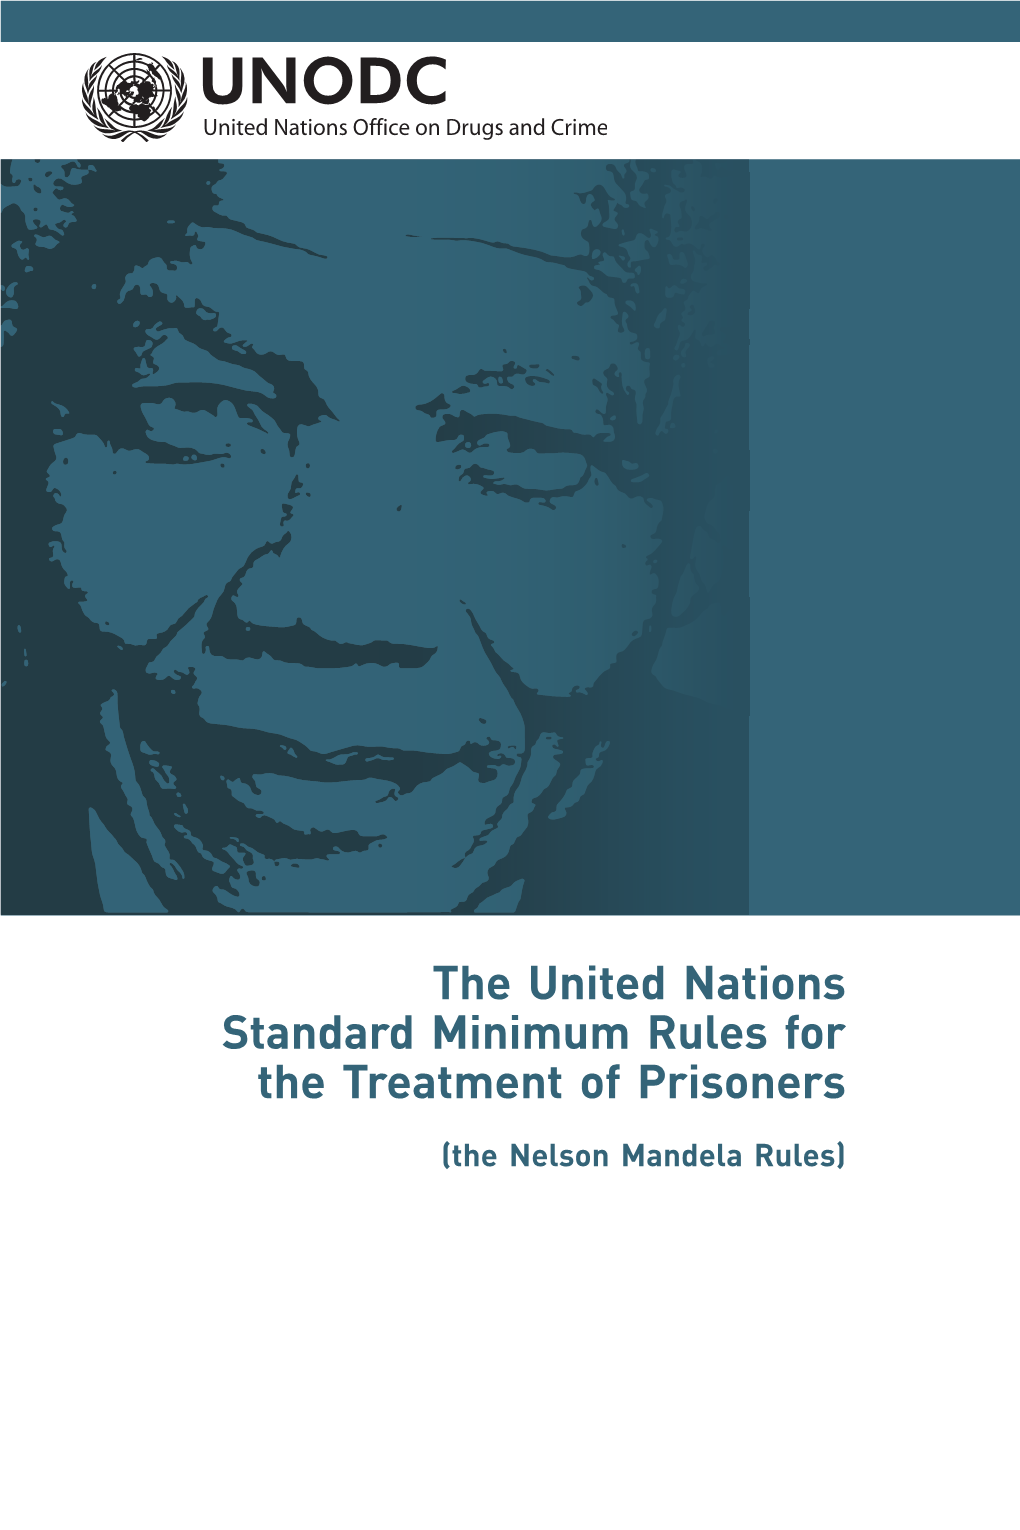 Nelson Mandela Rules) This Publication Has Been Made Possible Thanks to a Contribution from the Government of Germany